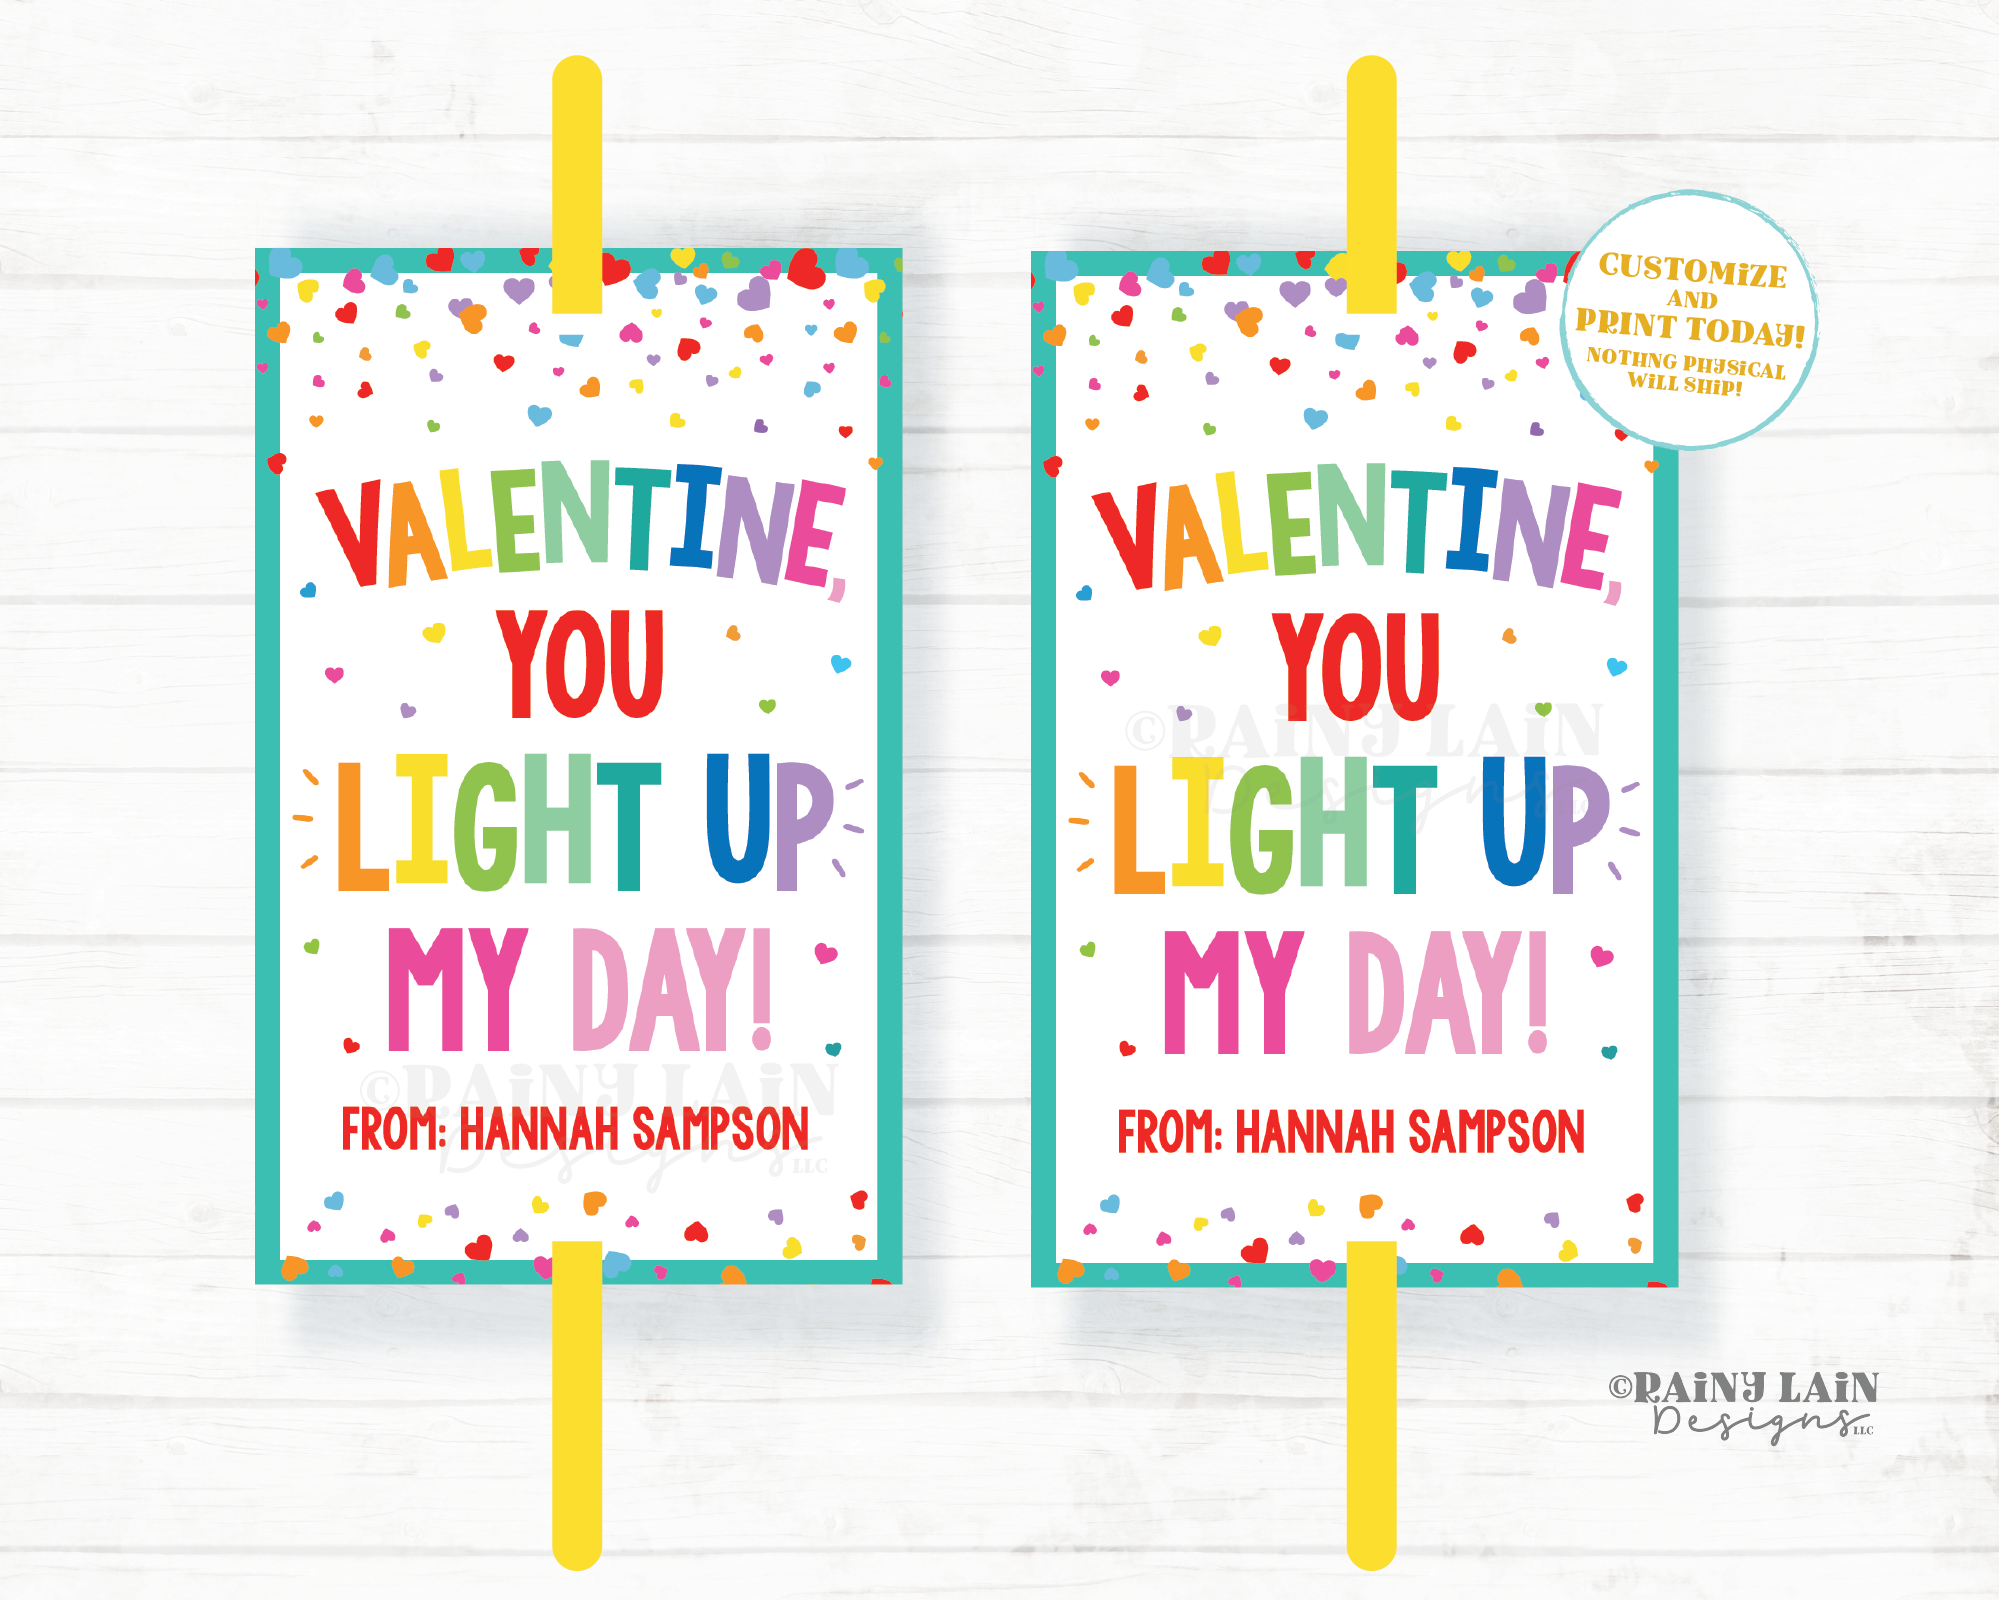 You Light Up My Day Valentine Tag Valentine's Day Glow Stick Tag Favor Tag Preschool Classroom Student Gift  Printable Kids Non-Candy Ideas